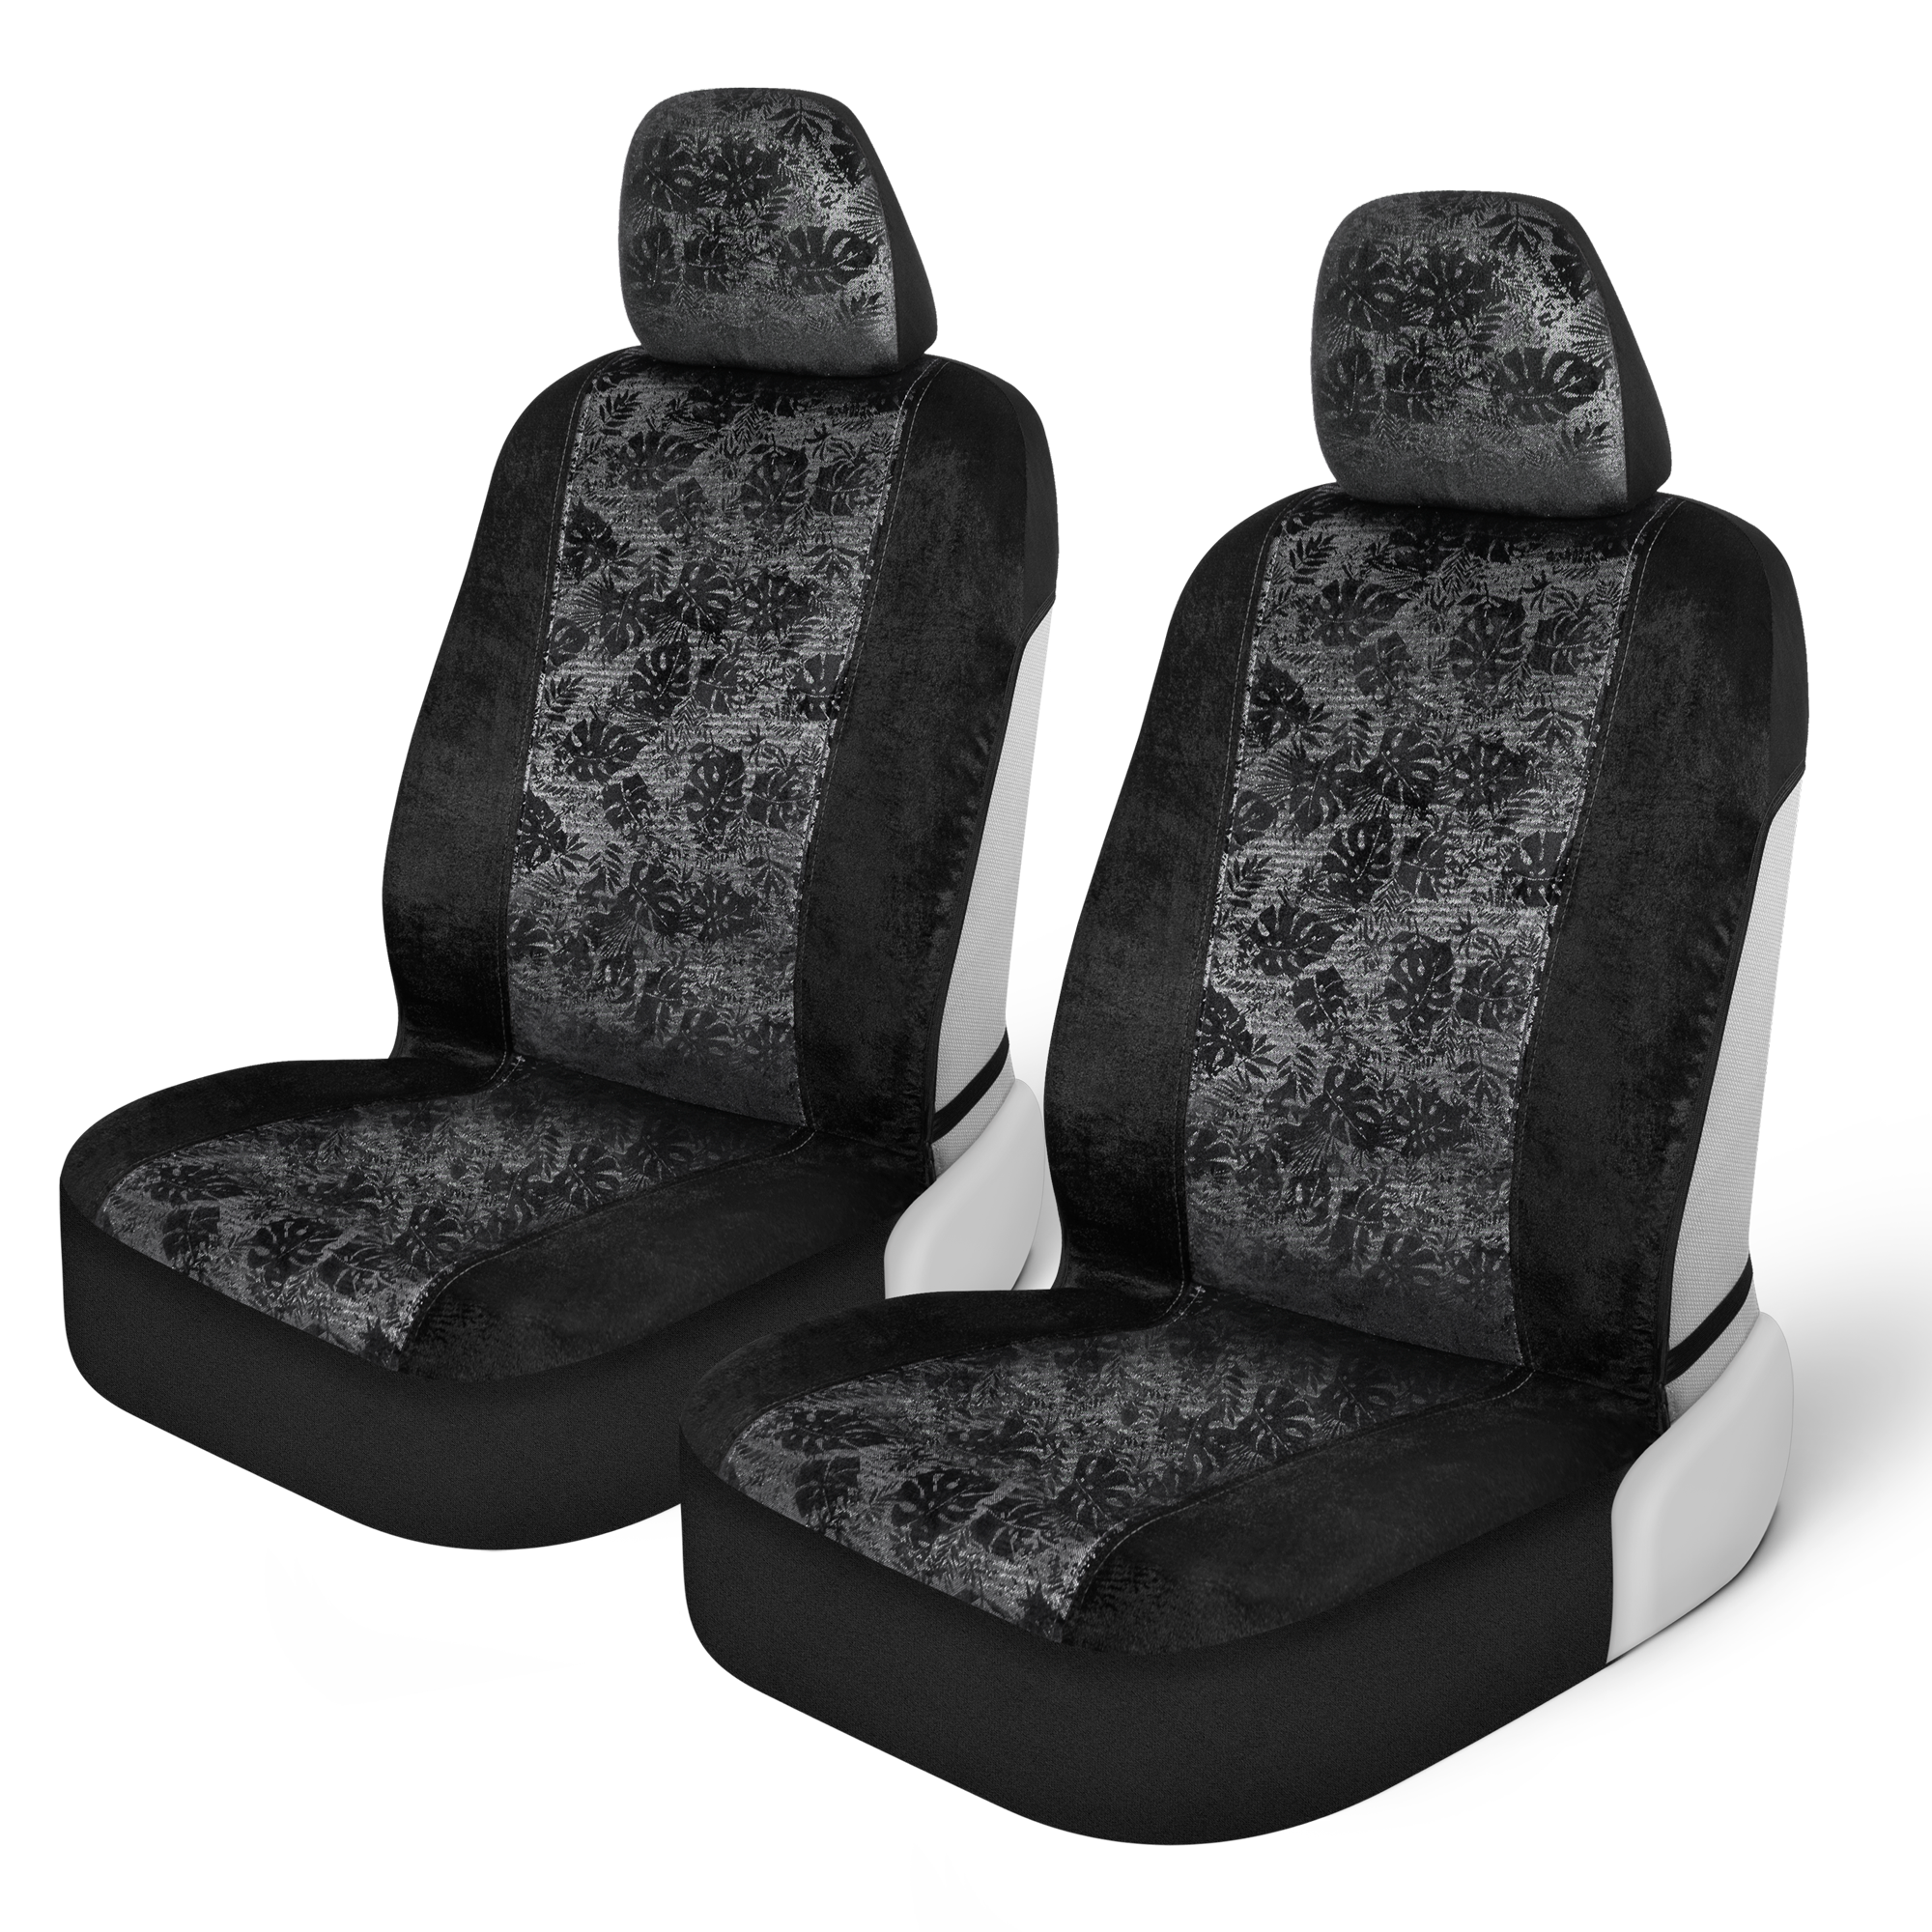 BDK Black Maui Car Seat Covers for Front Seats, 2 Pack – Tropical Pattern Front Seat Cover Set with Matching Headrest, Sideless Design for Easy Installation, Fits Most Car Truck Van and SUV